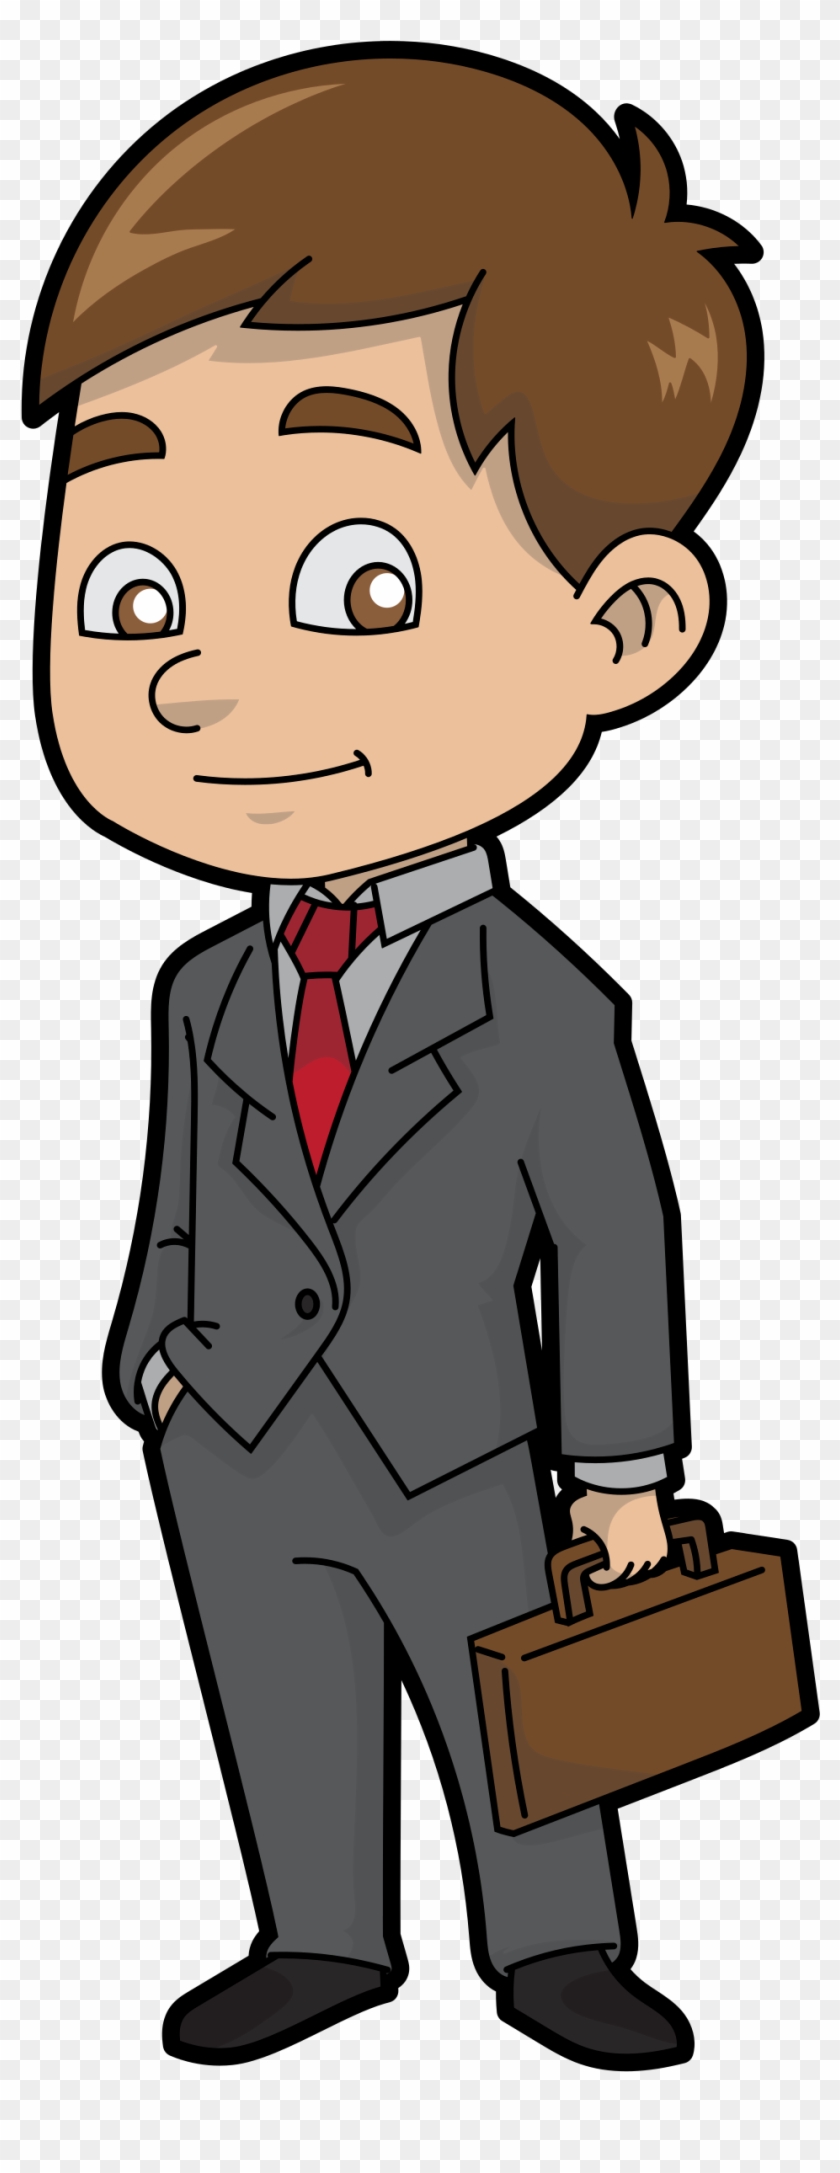 Open - Cartoon Pic Of A Businessman - Free Transparent PNG Clipart Images  Download